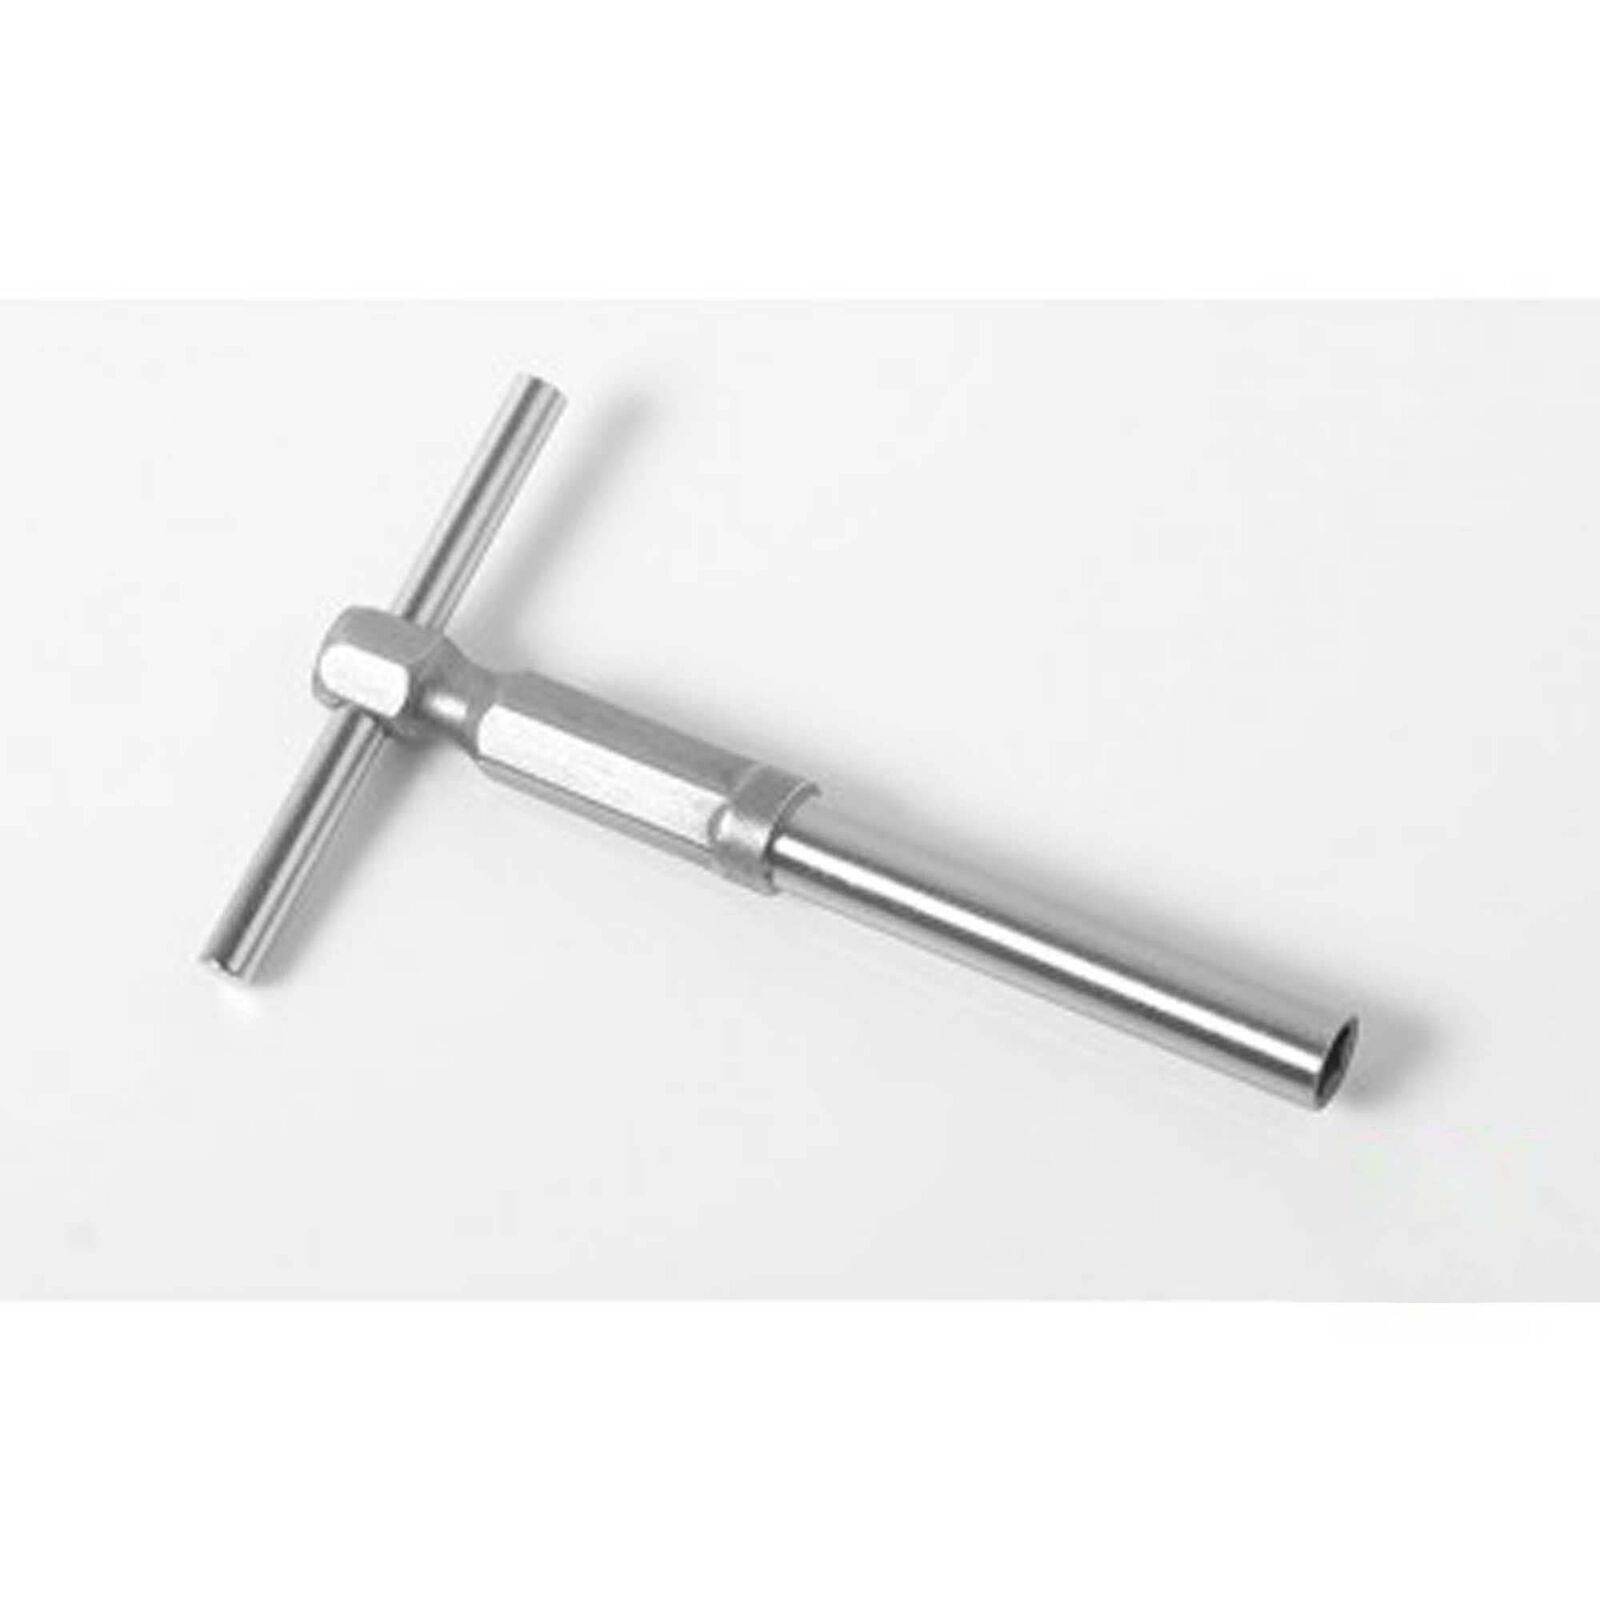 4.0mm Metric Hex TWrench Tool